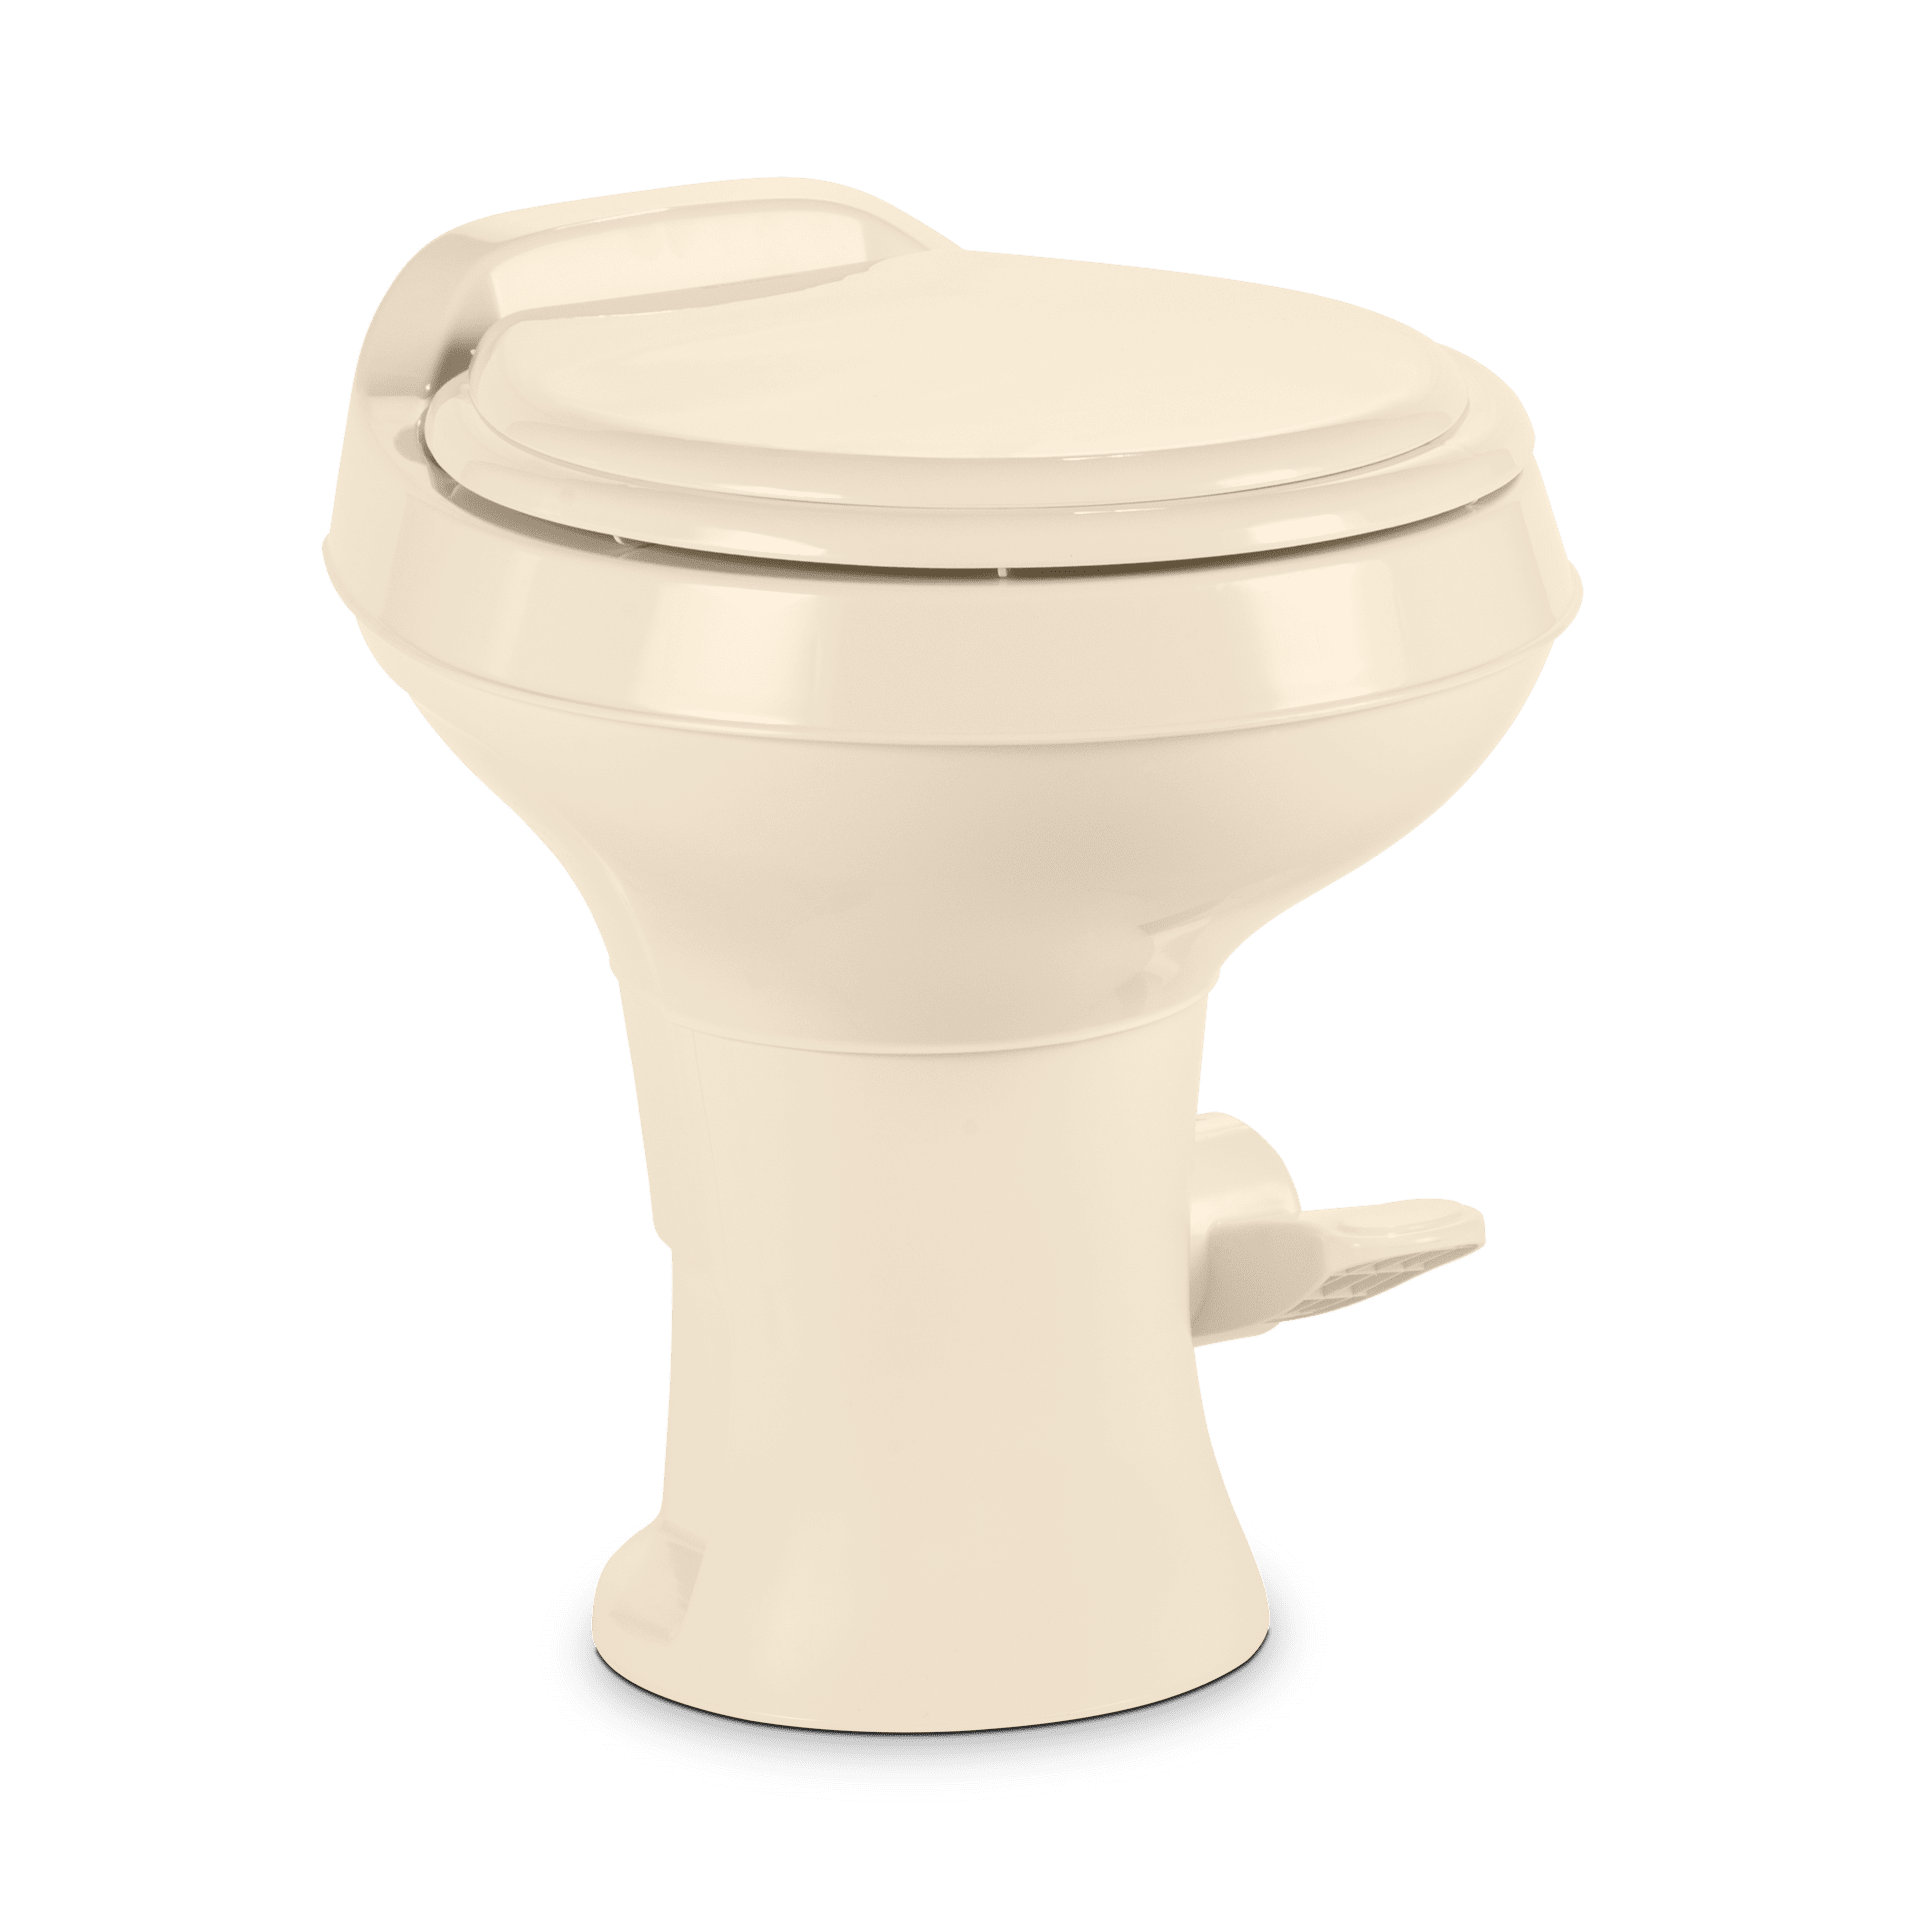 Got a smelly Dometic toilet? This could be the problem - RV Travel